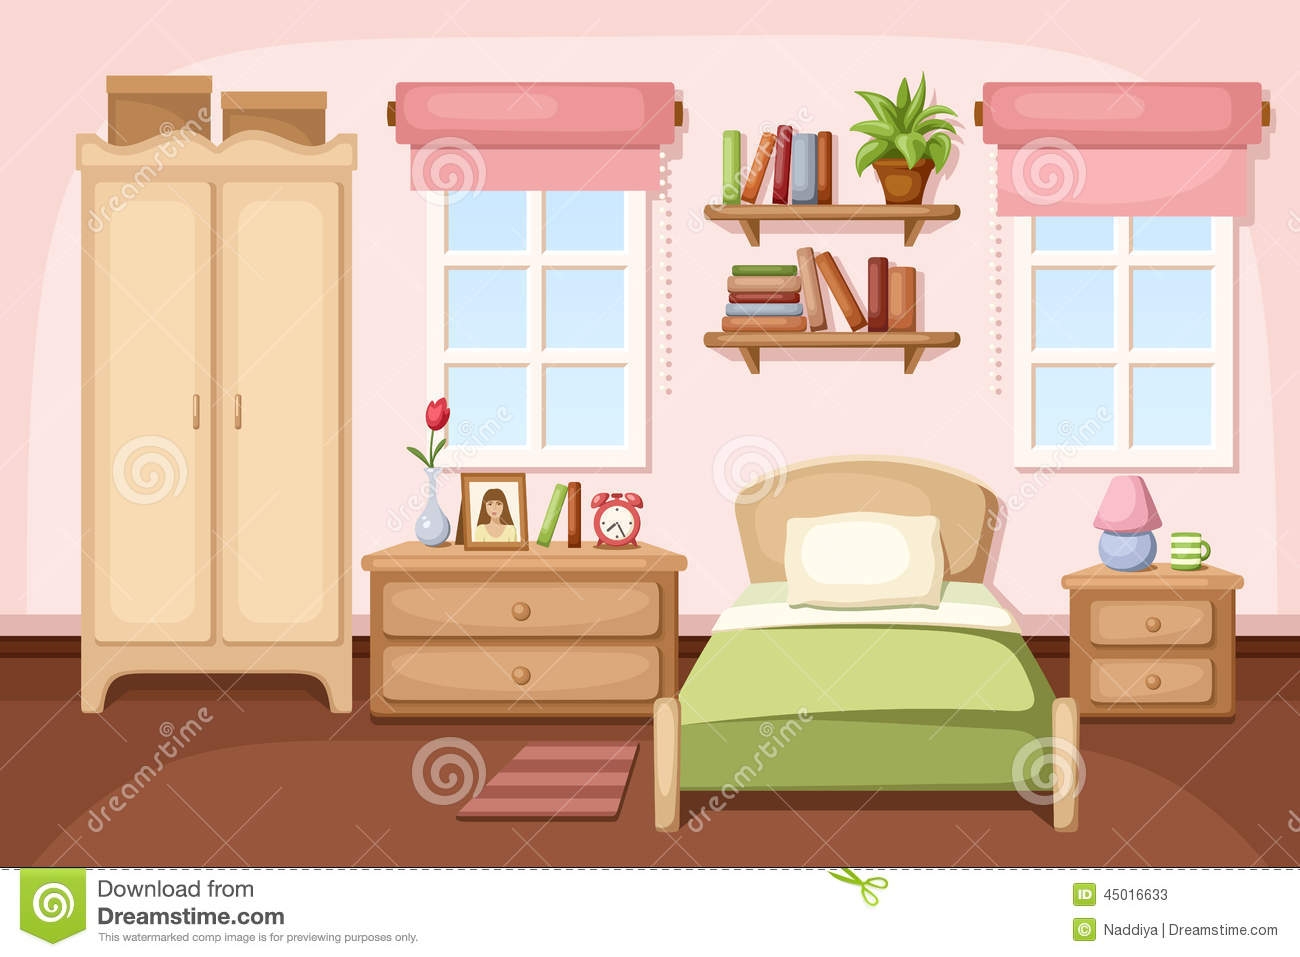 Bedroom clipart - Clipground